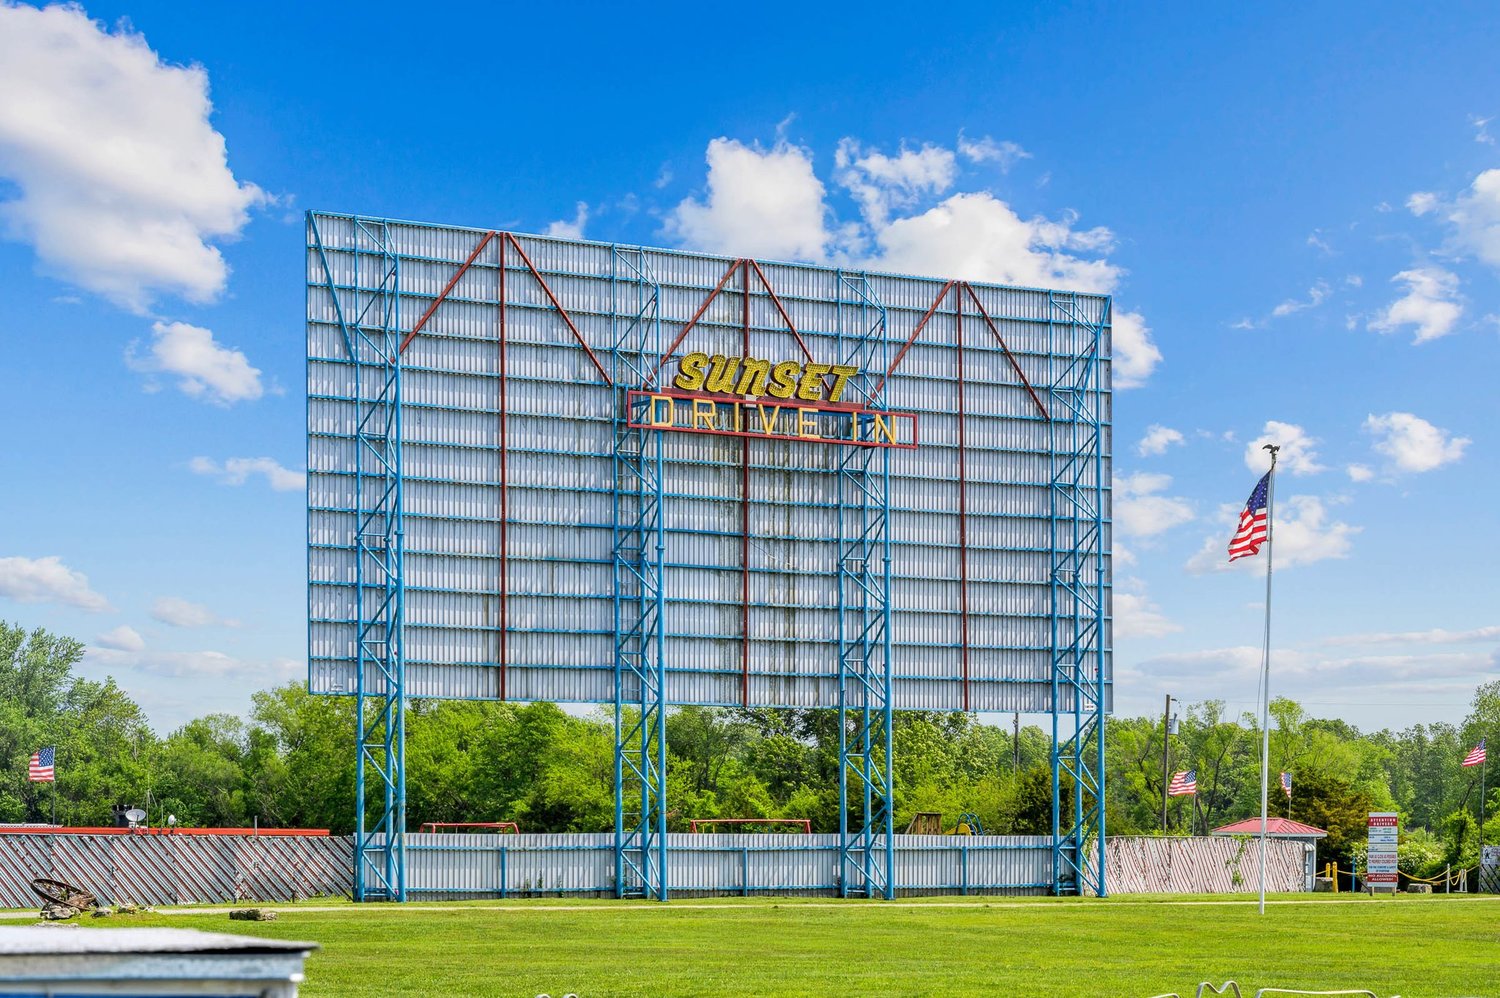 Sunset Drive-In has been in operation since 1951.